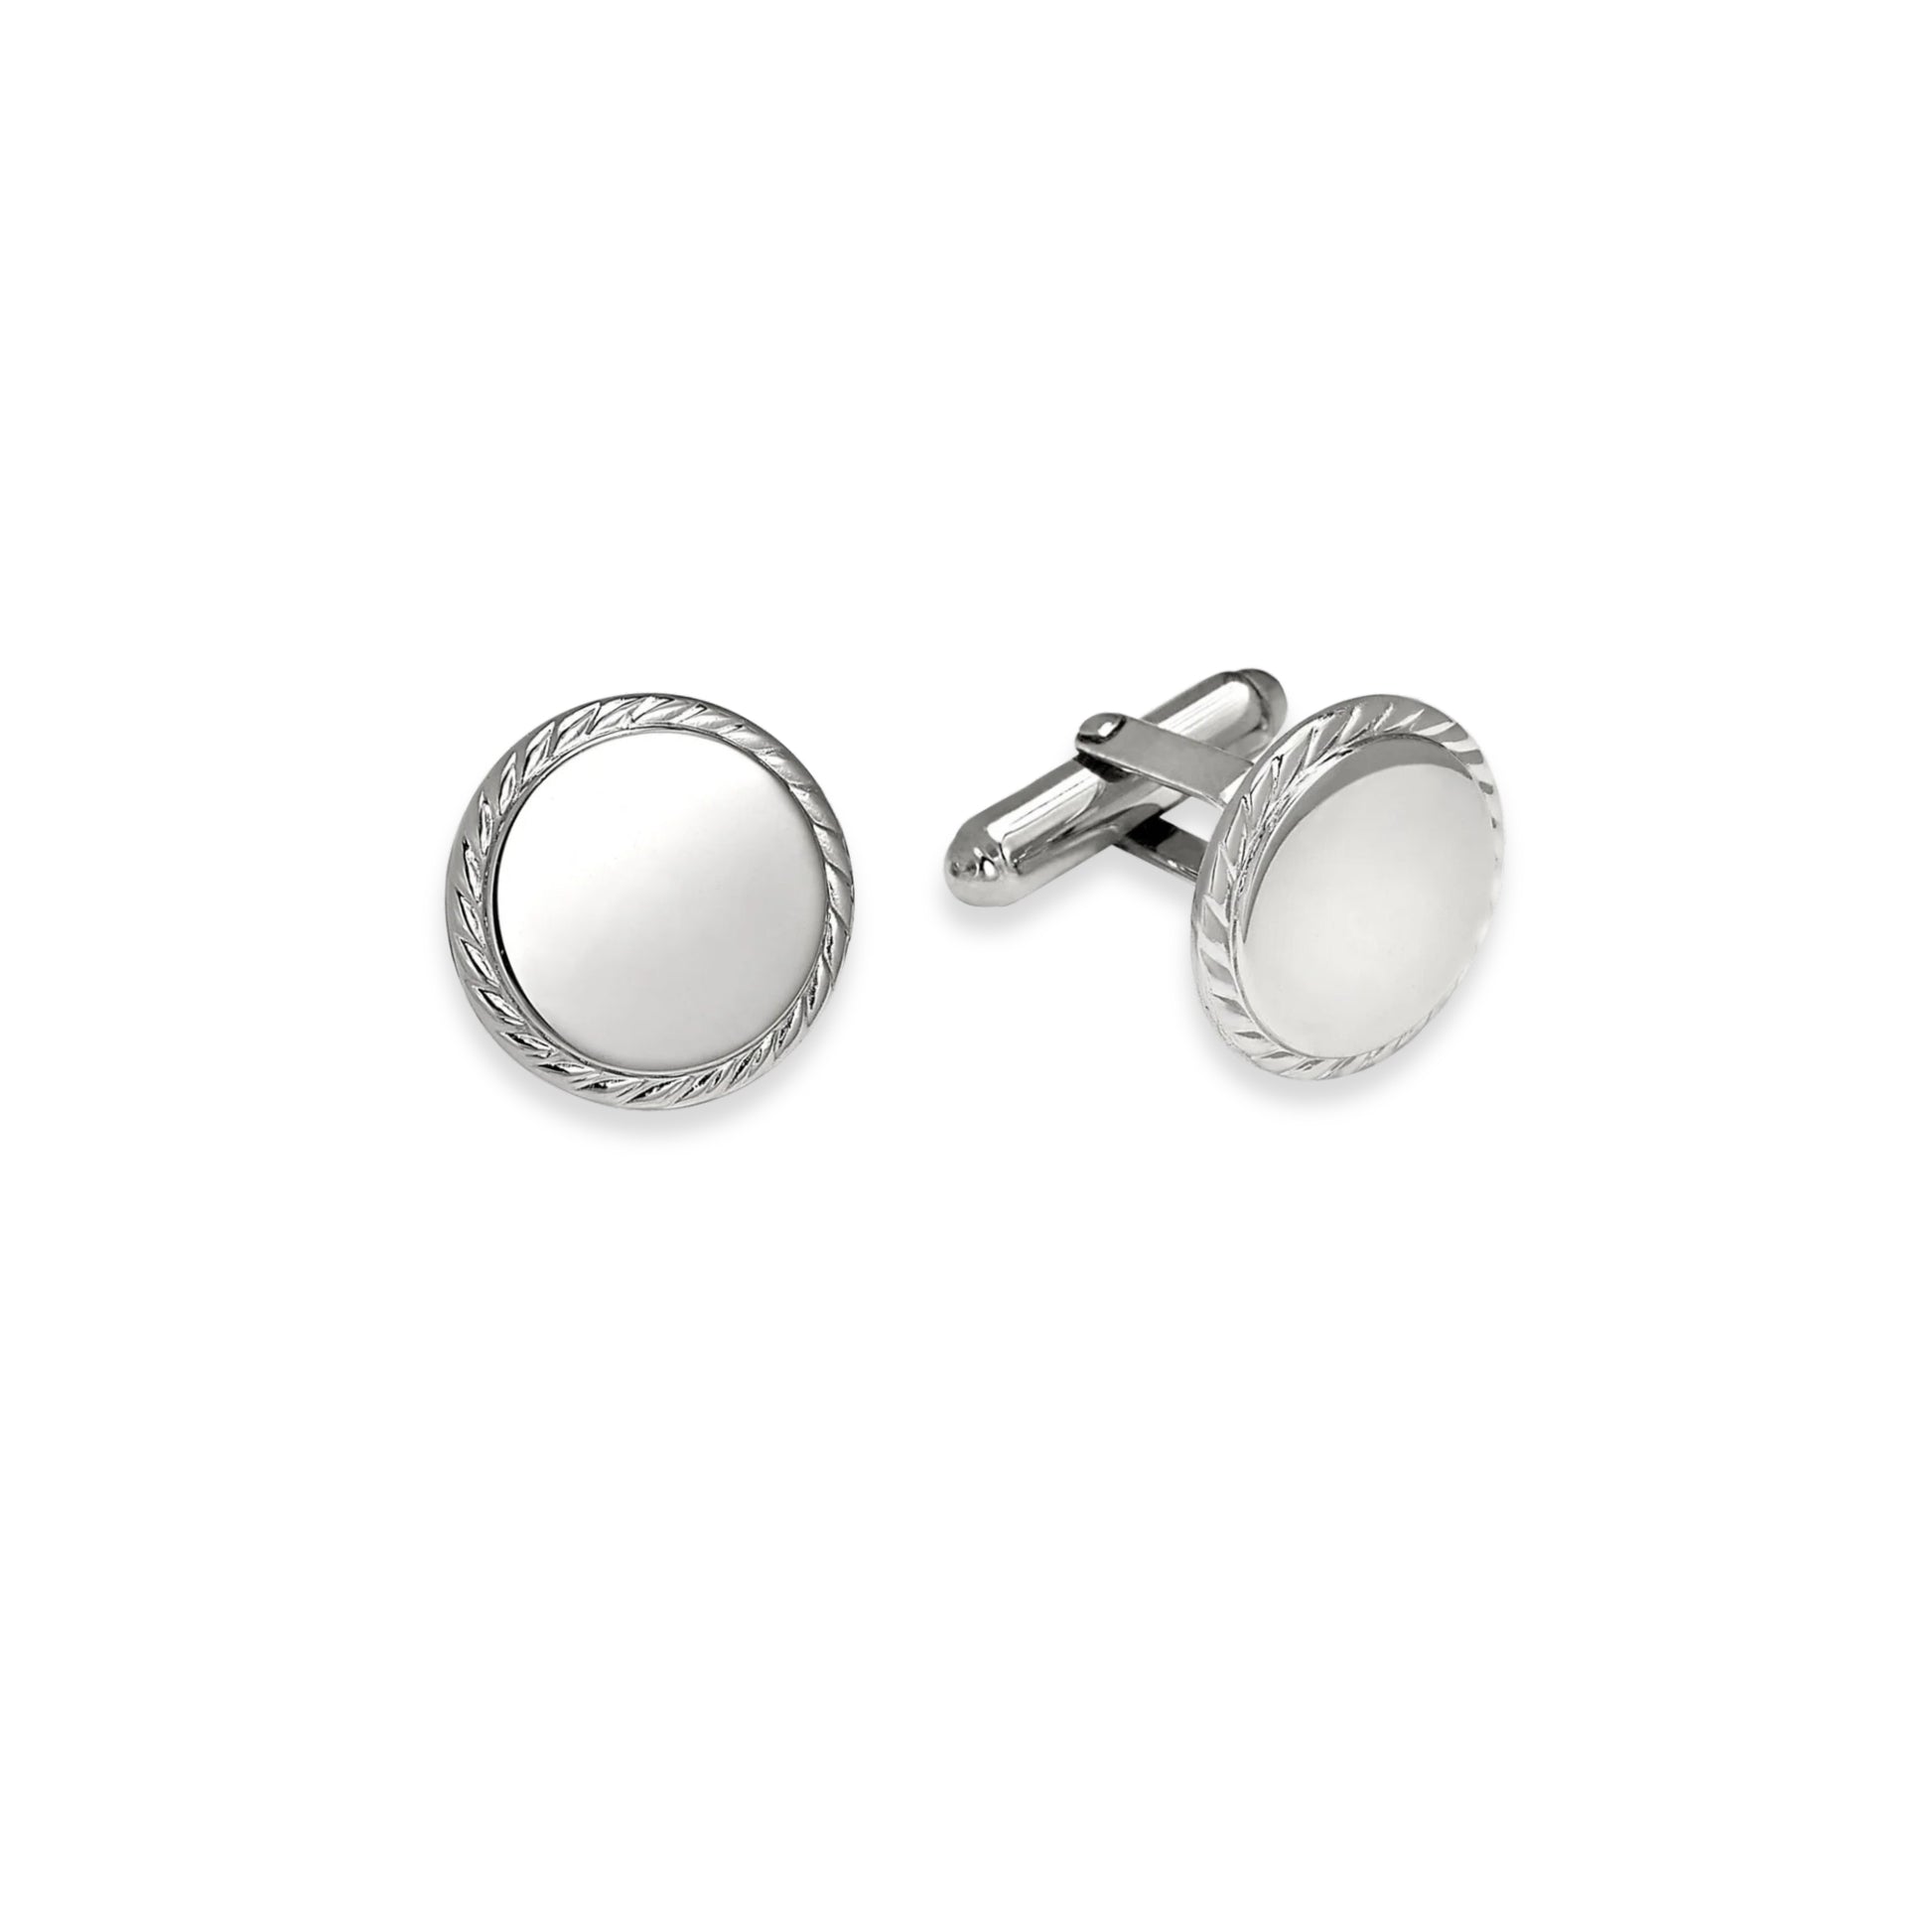 Sterling Silver Round Cufflinks with Rope Edge